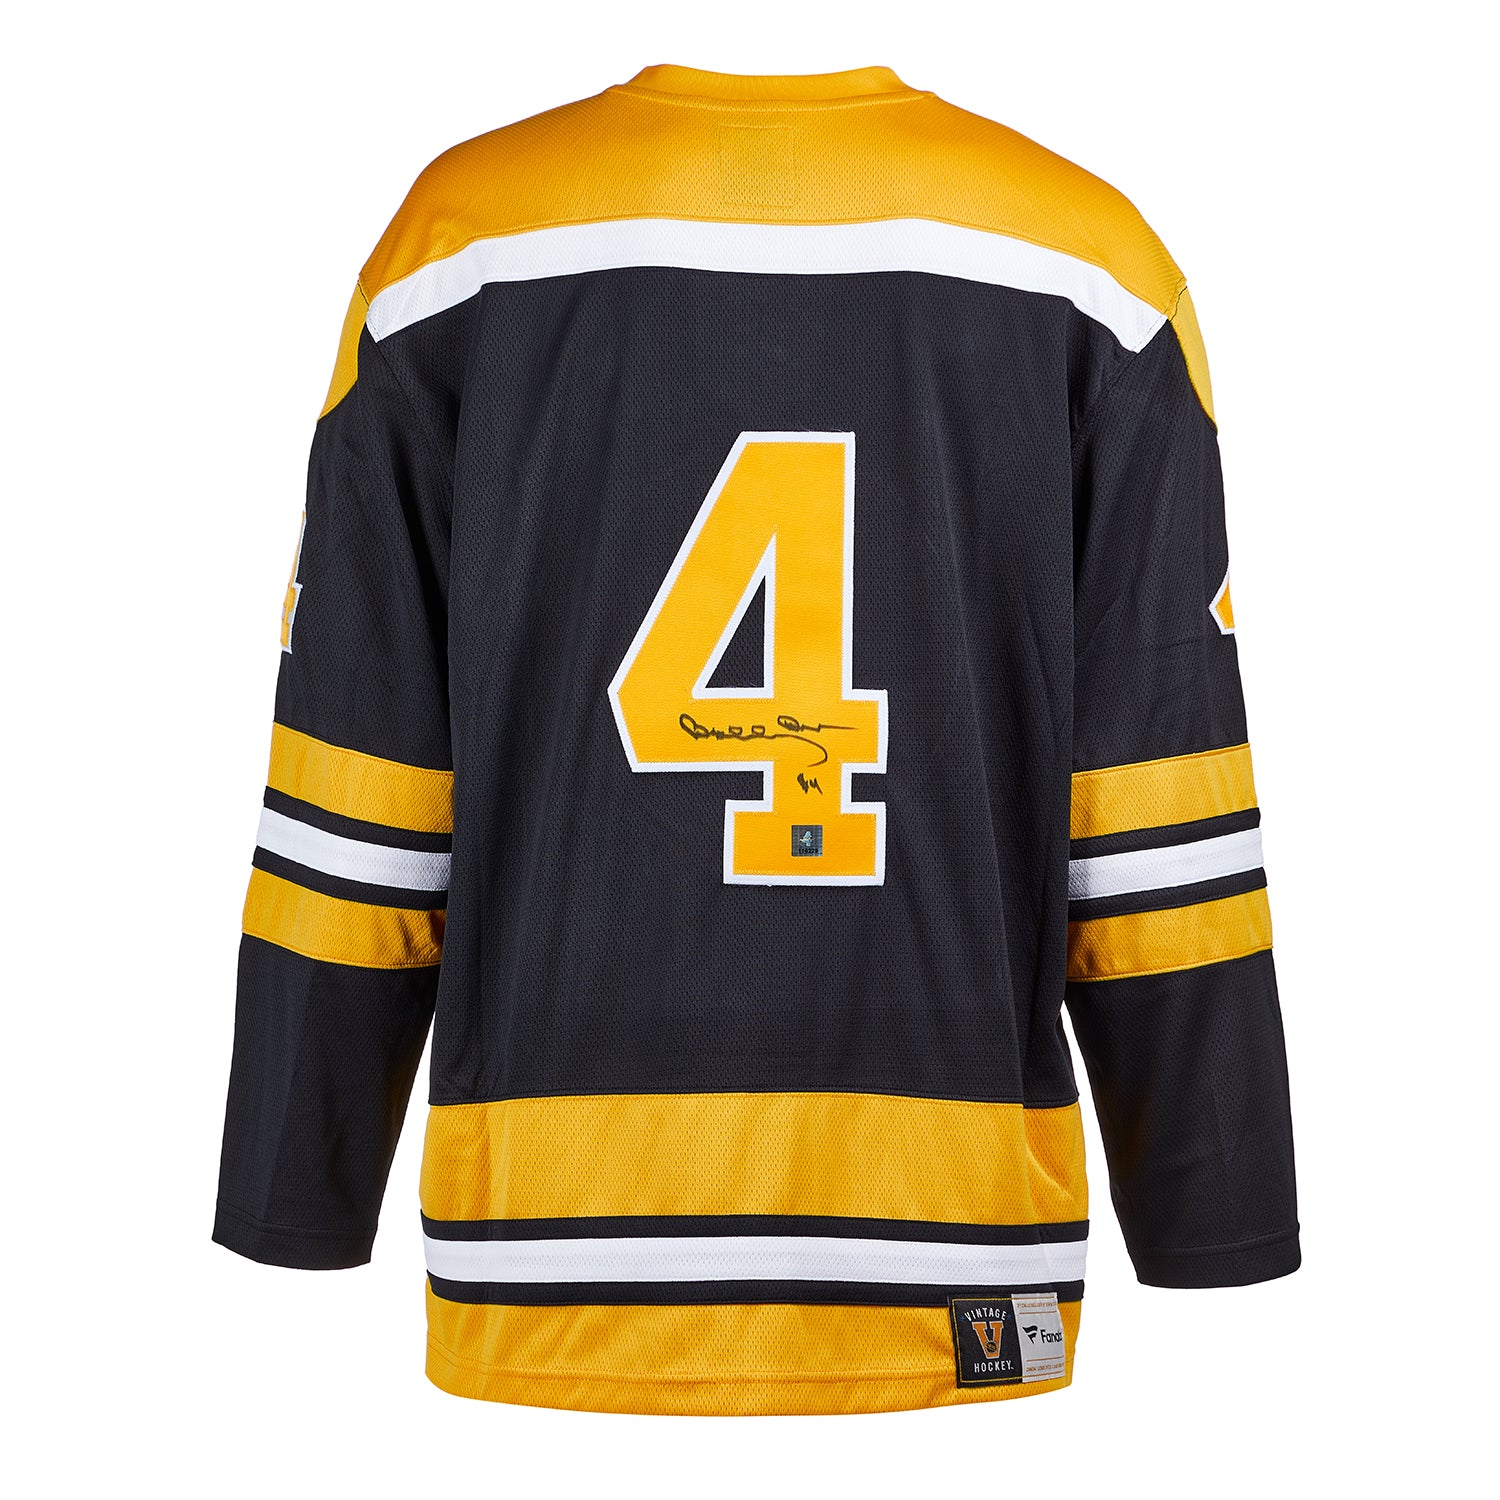 Bobby Orr NHL All-Star 1971-72 jersey artwork, This is a hi…